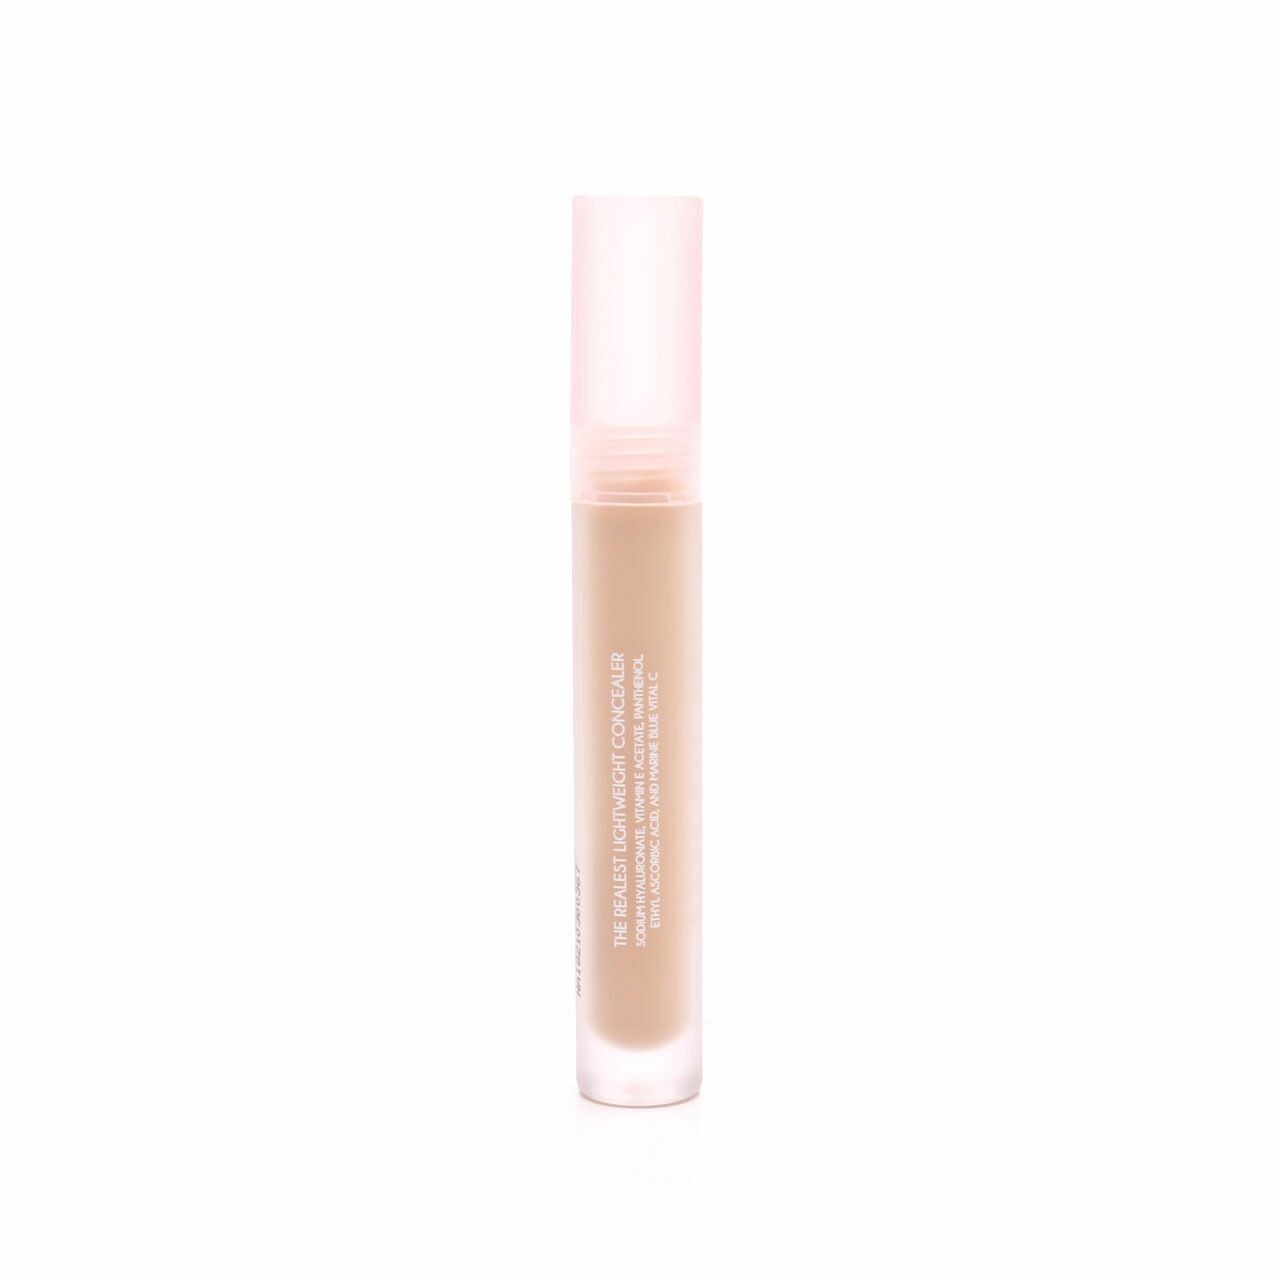 Rose All Day The Realest Lightweight Concealer Faces	